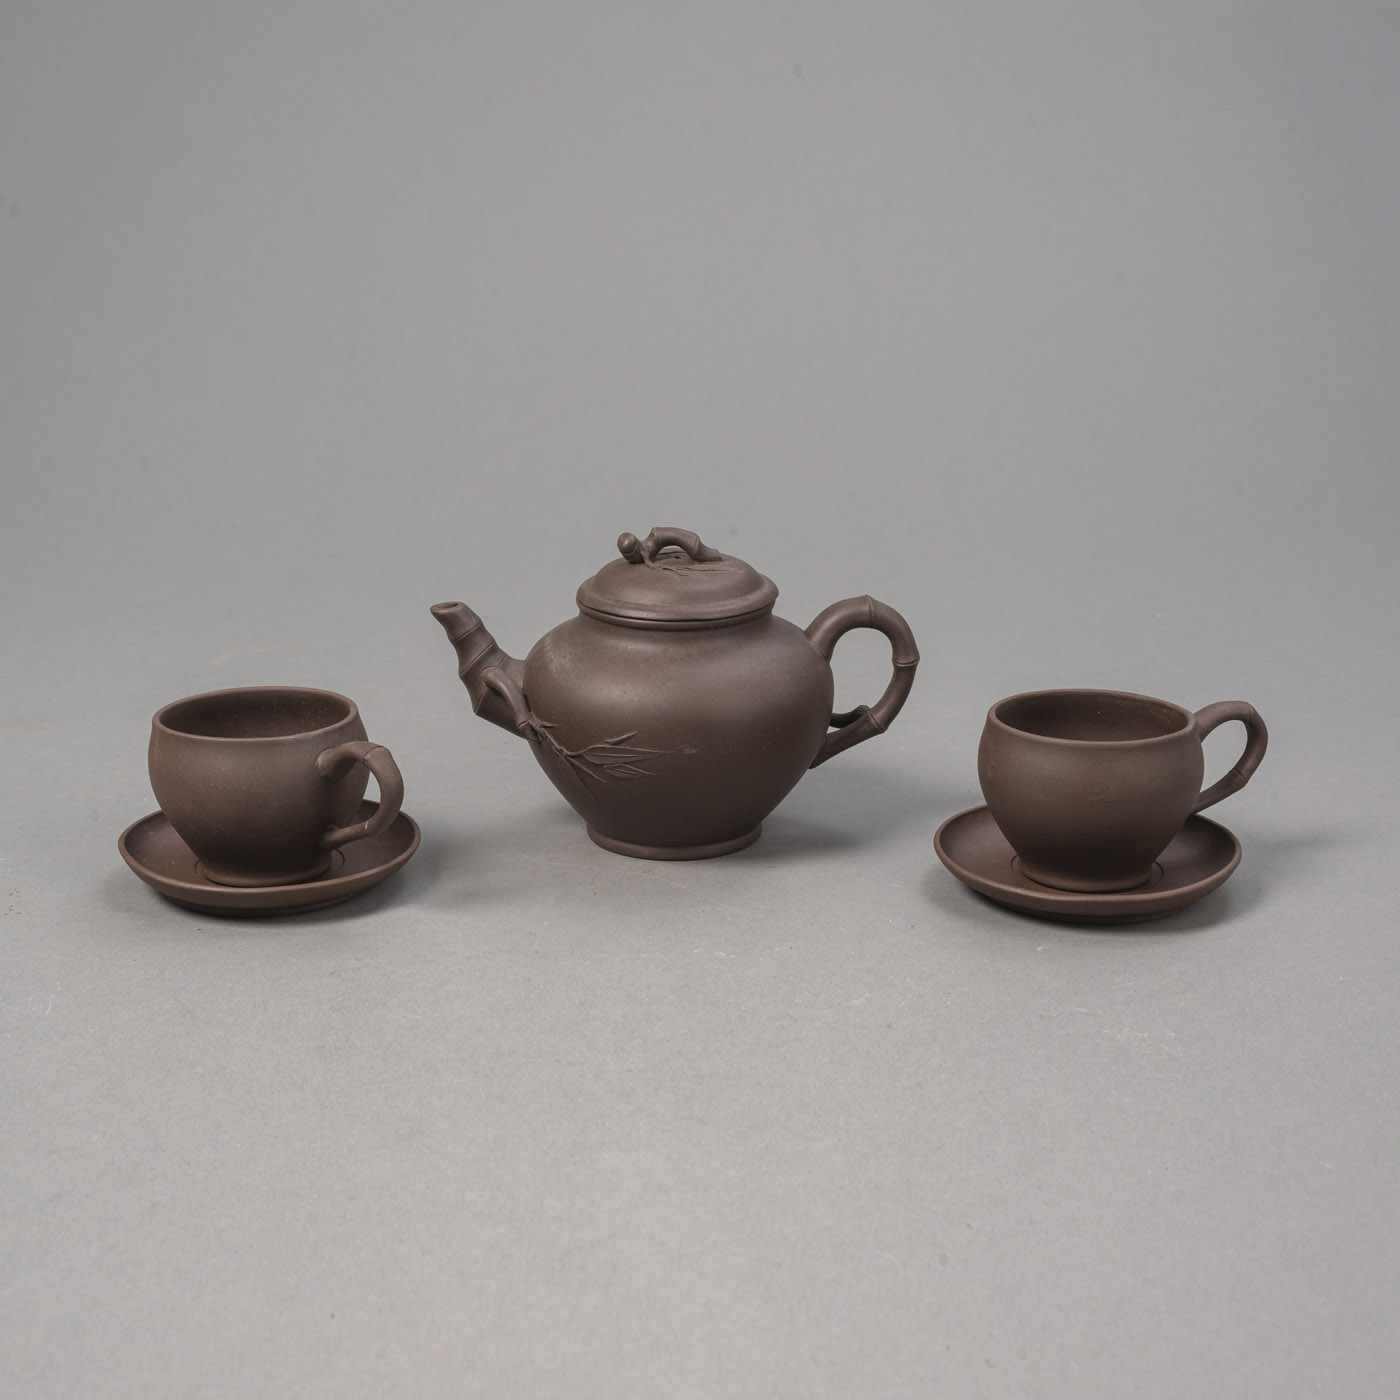 <b>A YIXING DARK BROWN ZISHA CLAY TEAPOT WITH BAMBOO DECORATION AND TWO CUPS AND TWO SAUCERS IN A BOX</b>